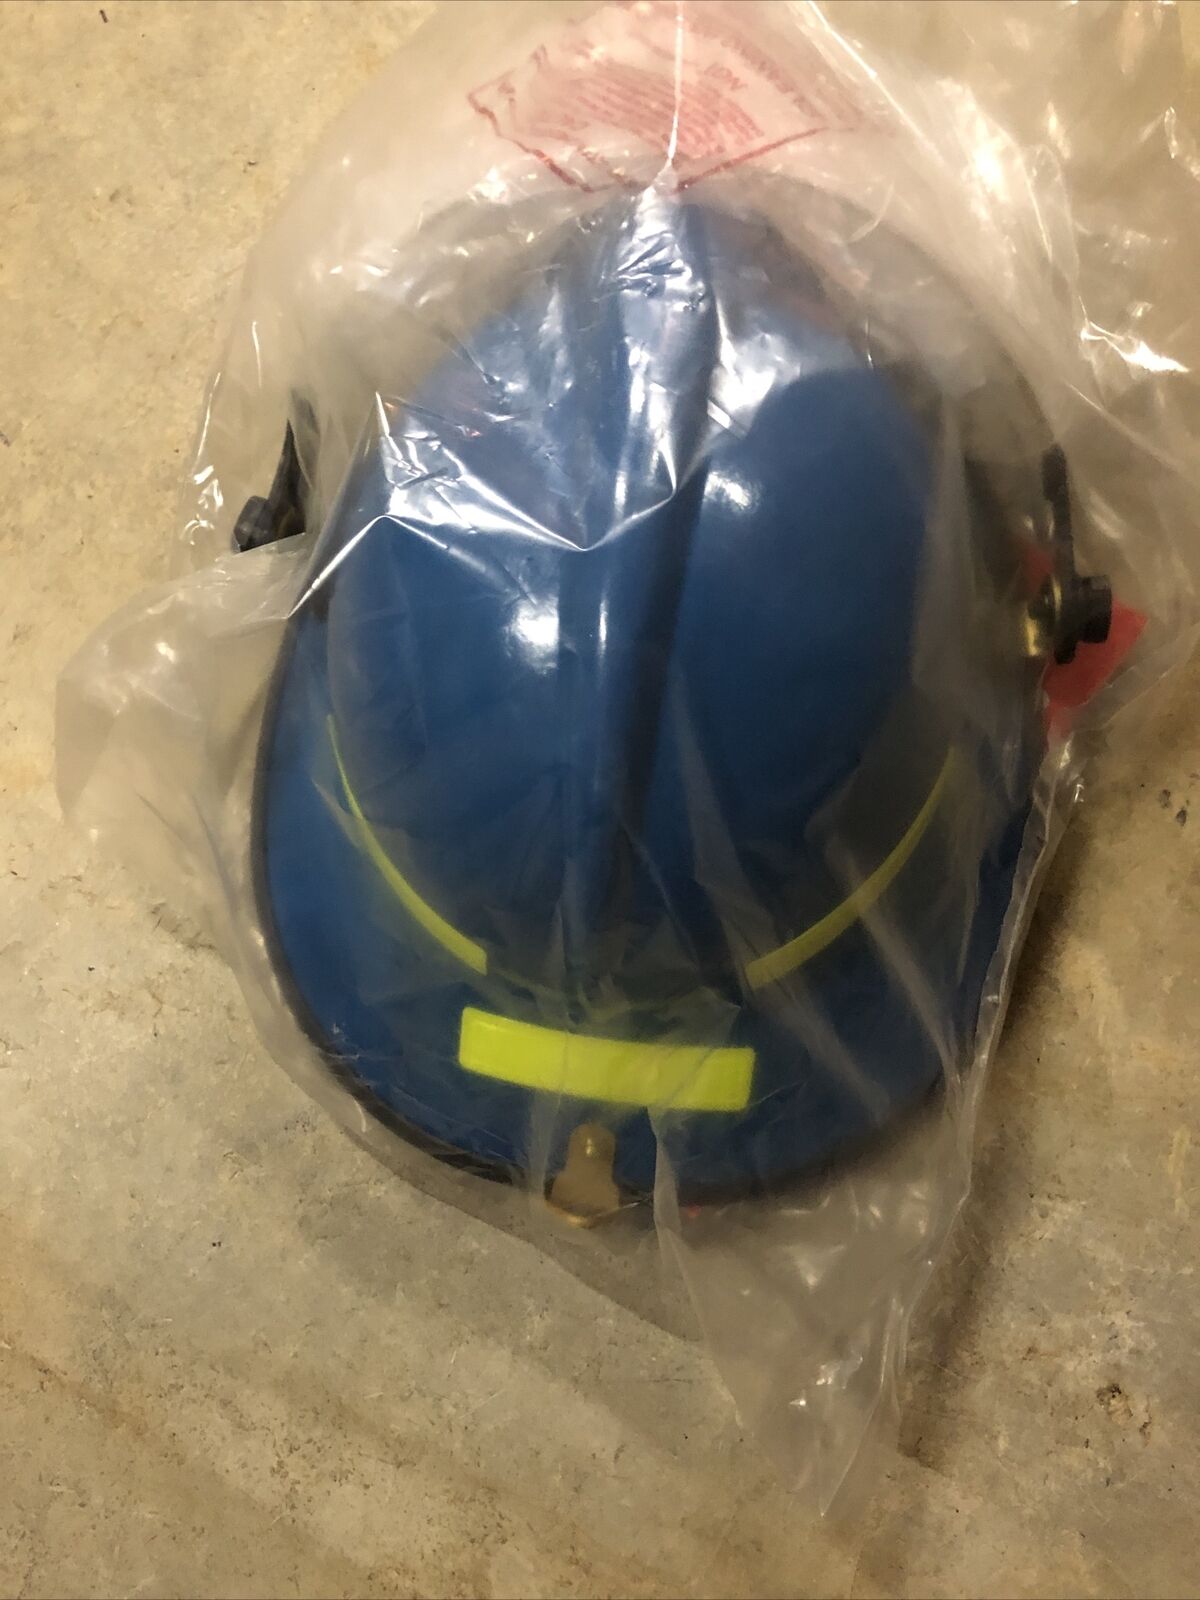 HONEYWELL MORNING PRIDE LITE FORCE PLUS Fire Helmet BLUE Brand NEW With TAGS